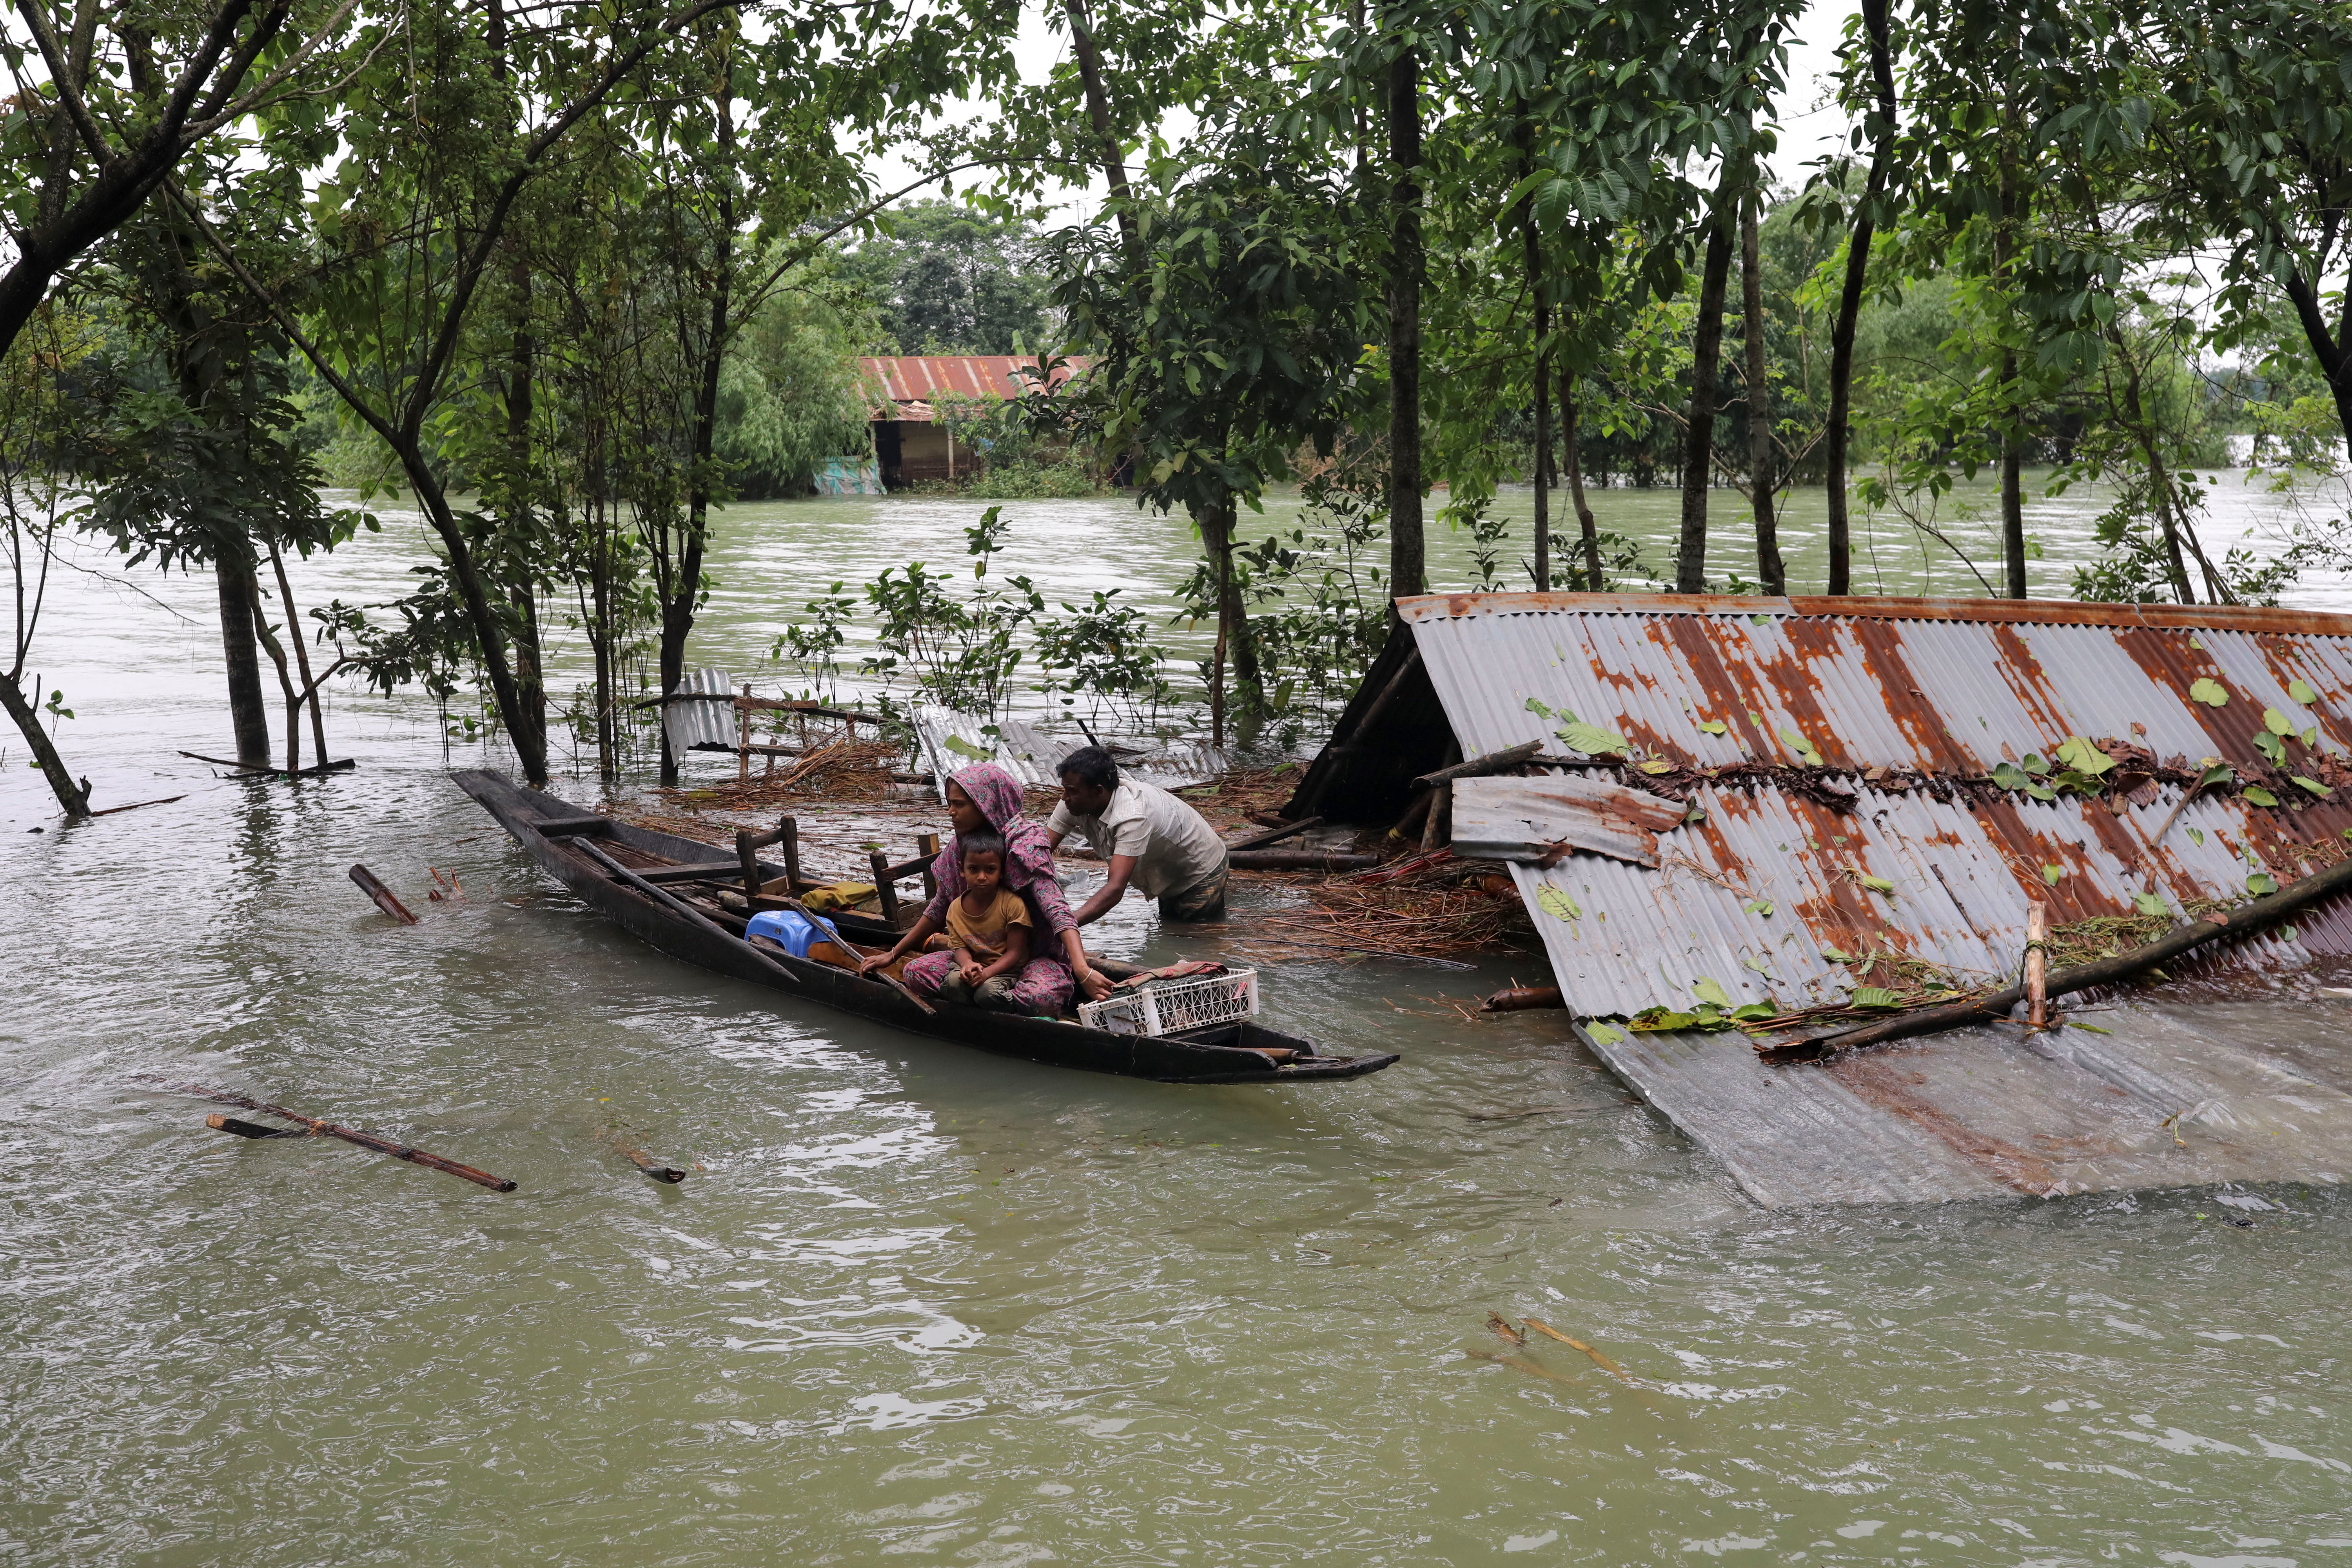 People get on a boat as they look for shelter during a widespread flood in Sylhet